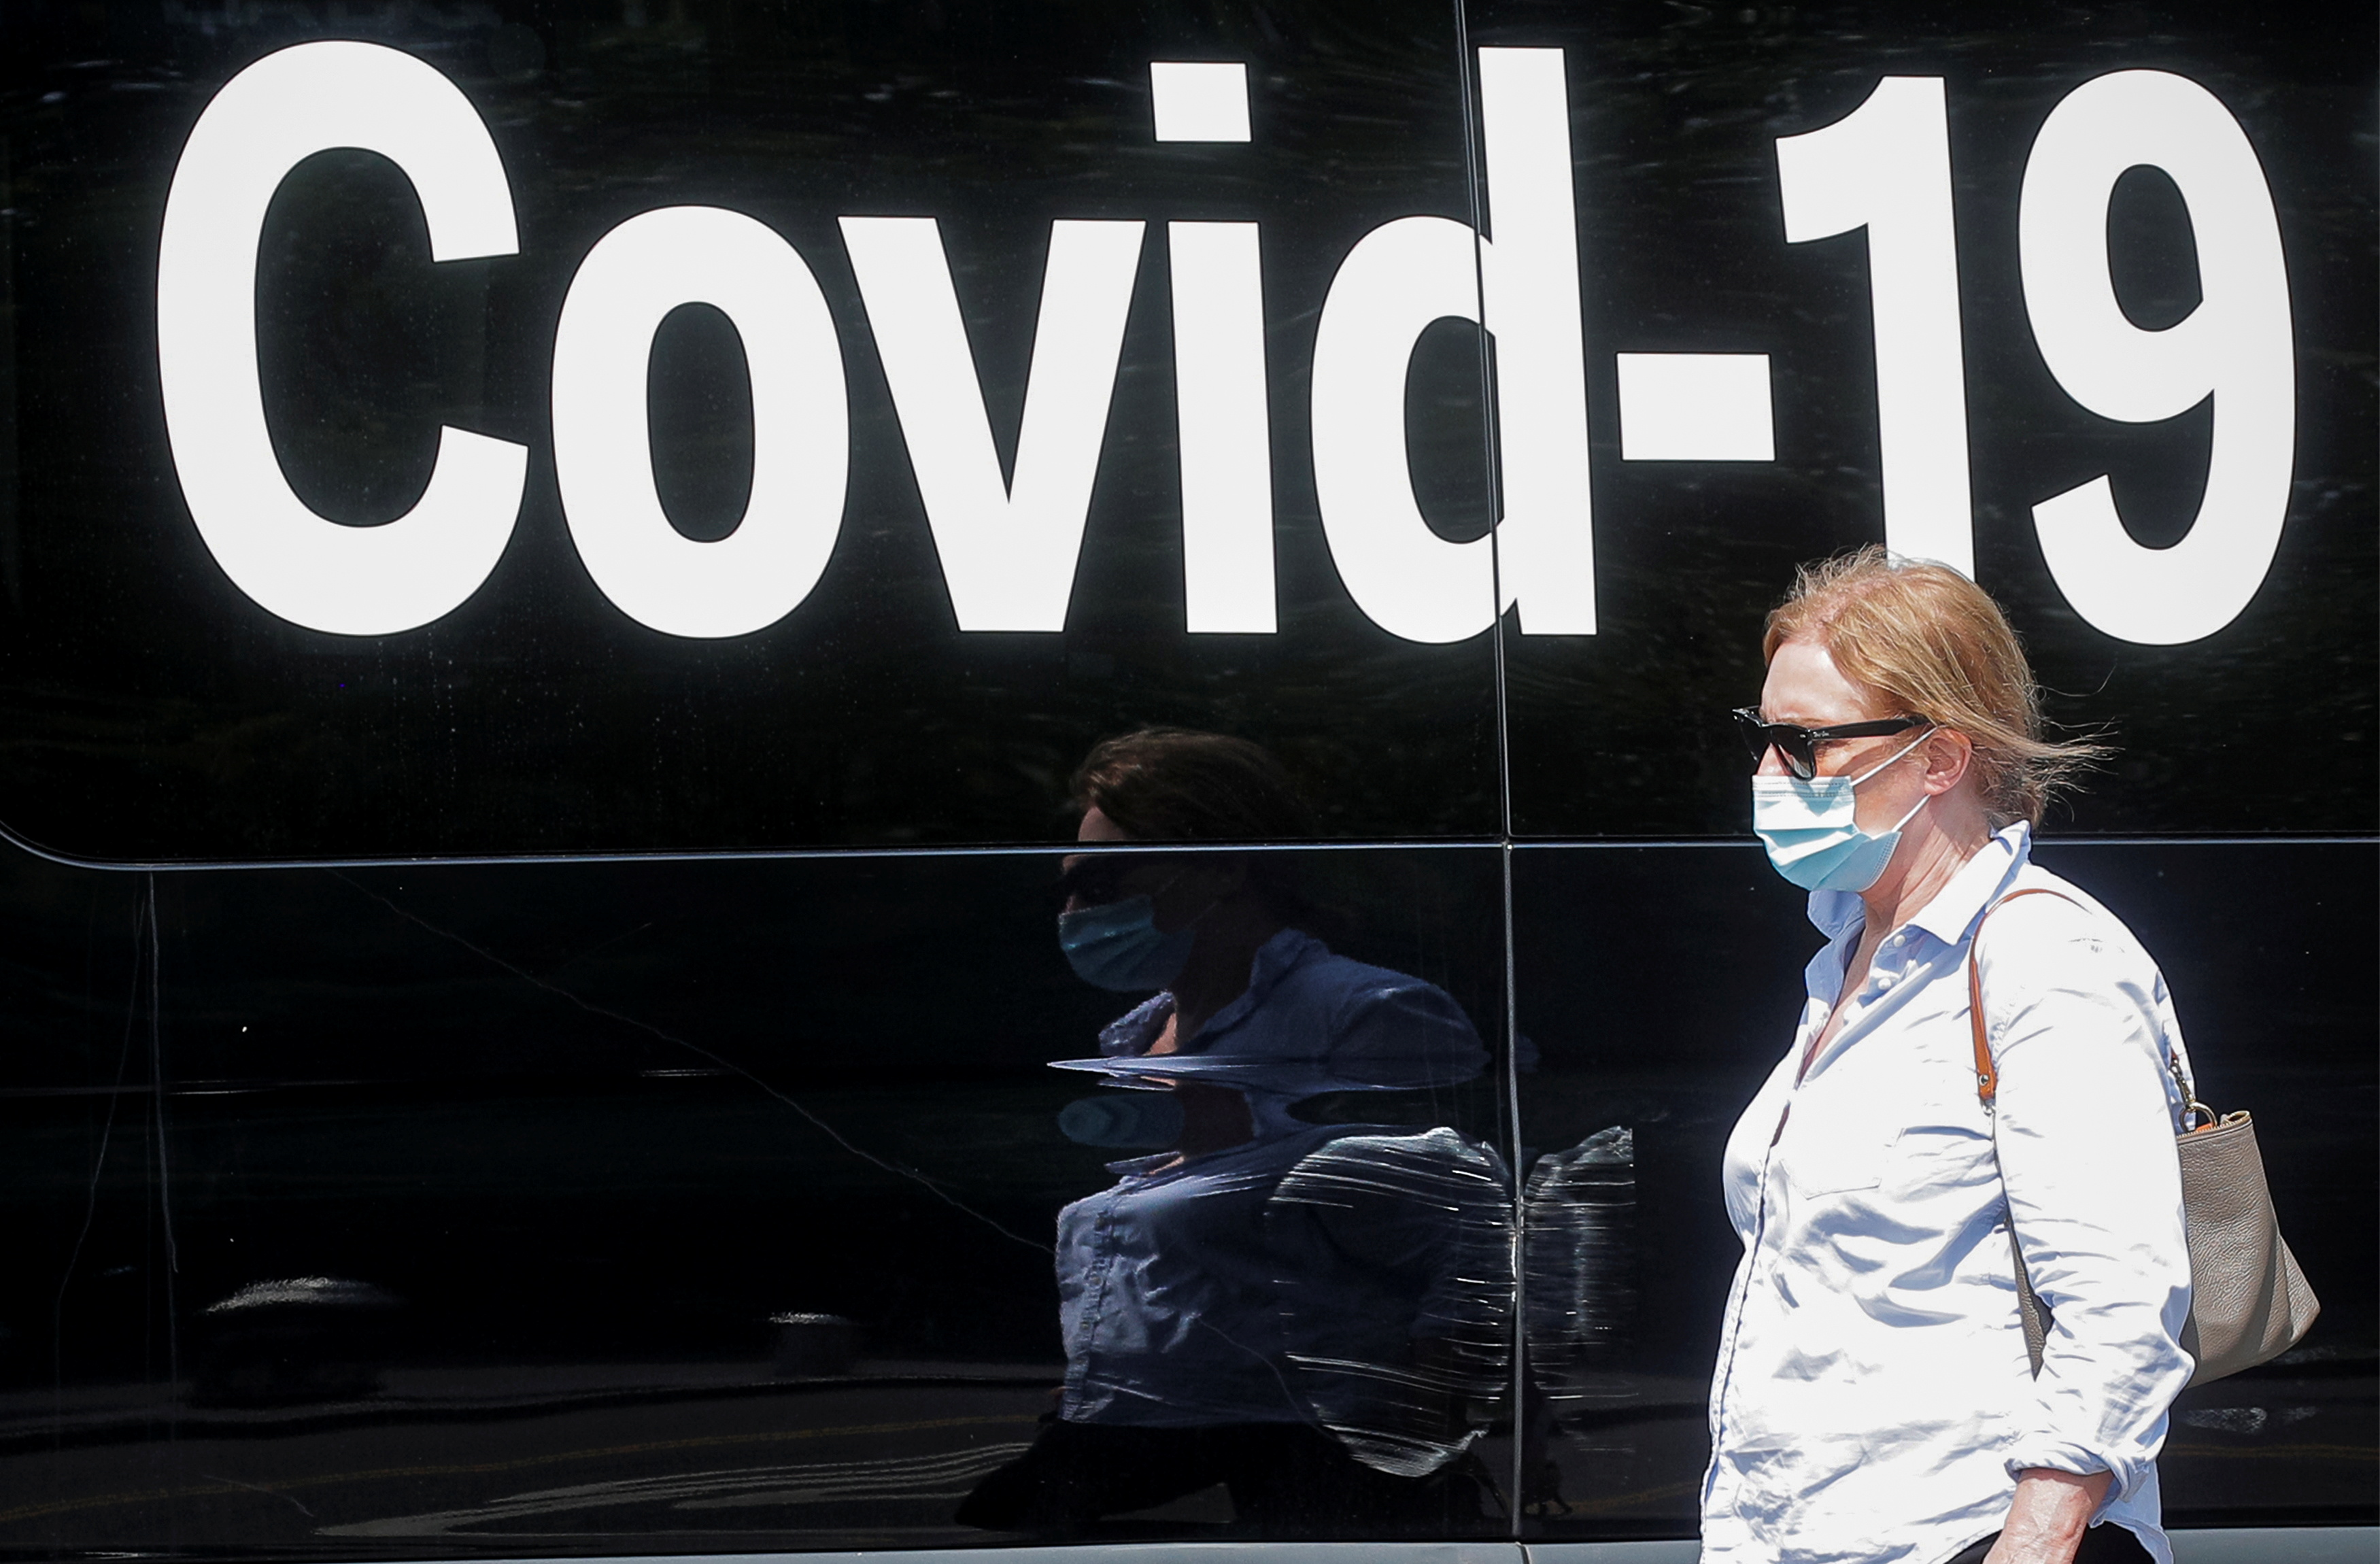 A woman passes by a COVID-19 mobile testing van in New York